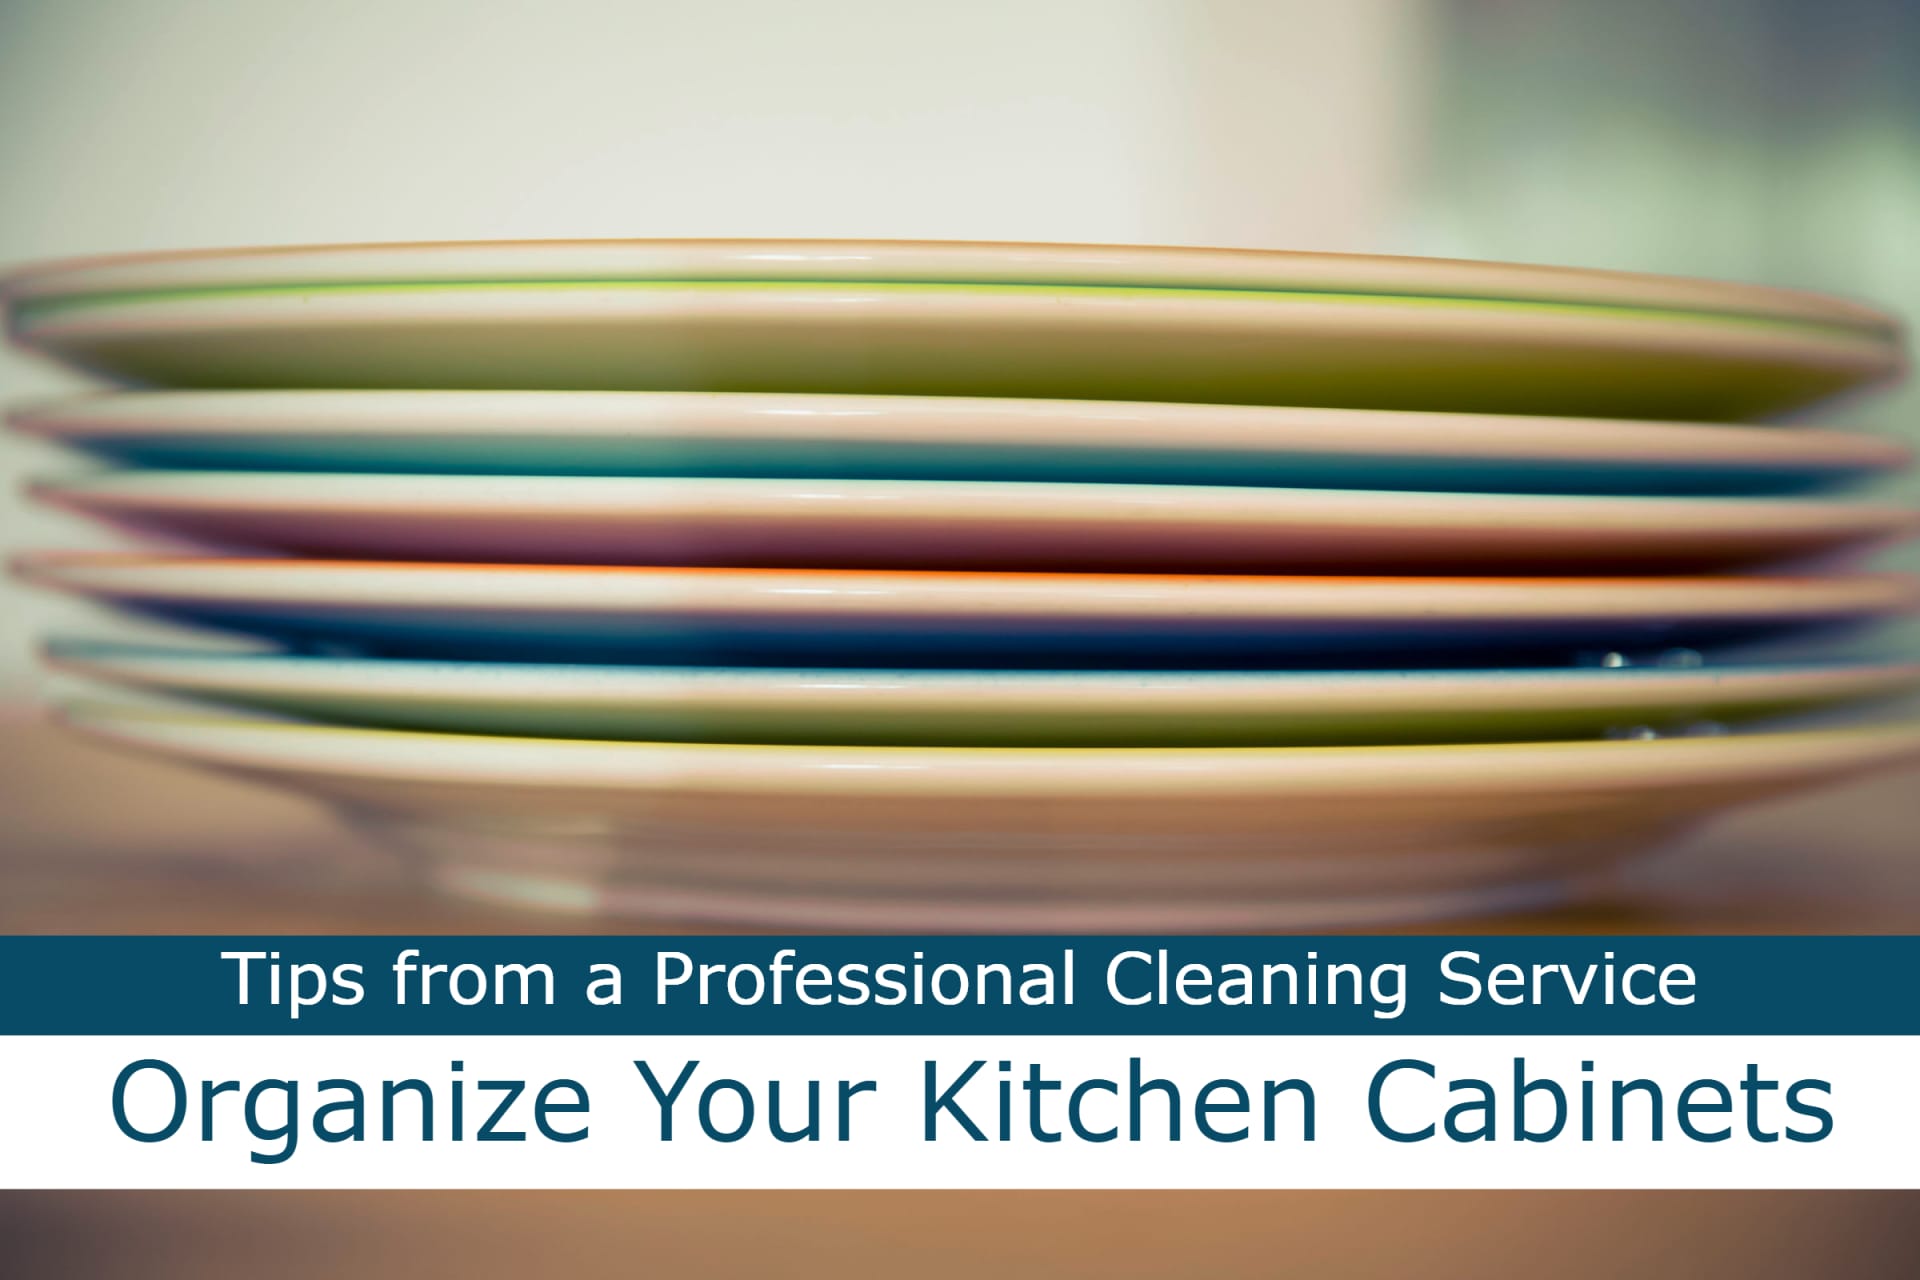 Cleaning Service Tips - Organize Kitchen Cabinets